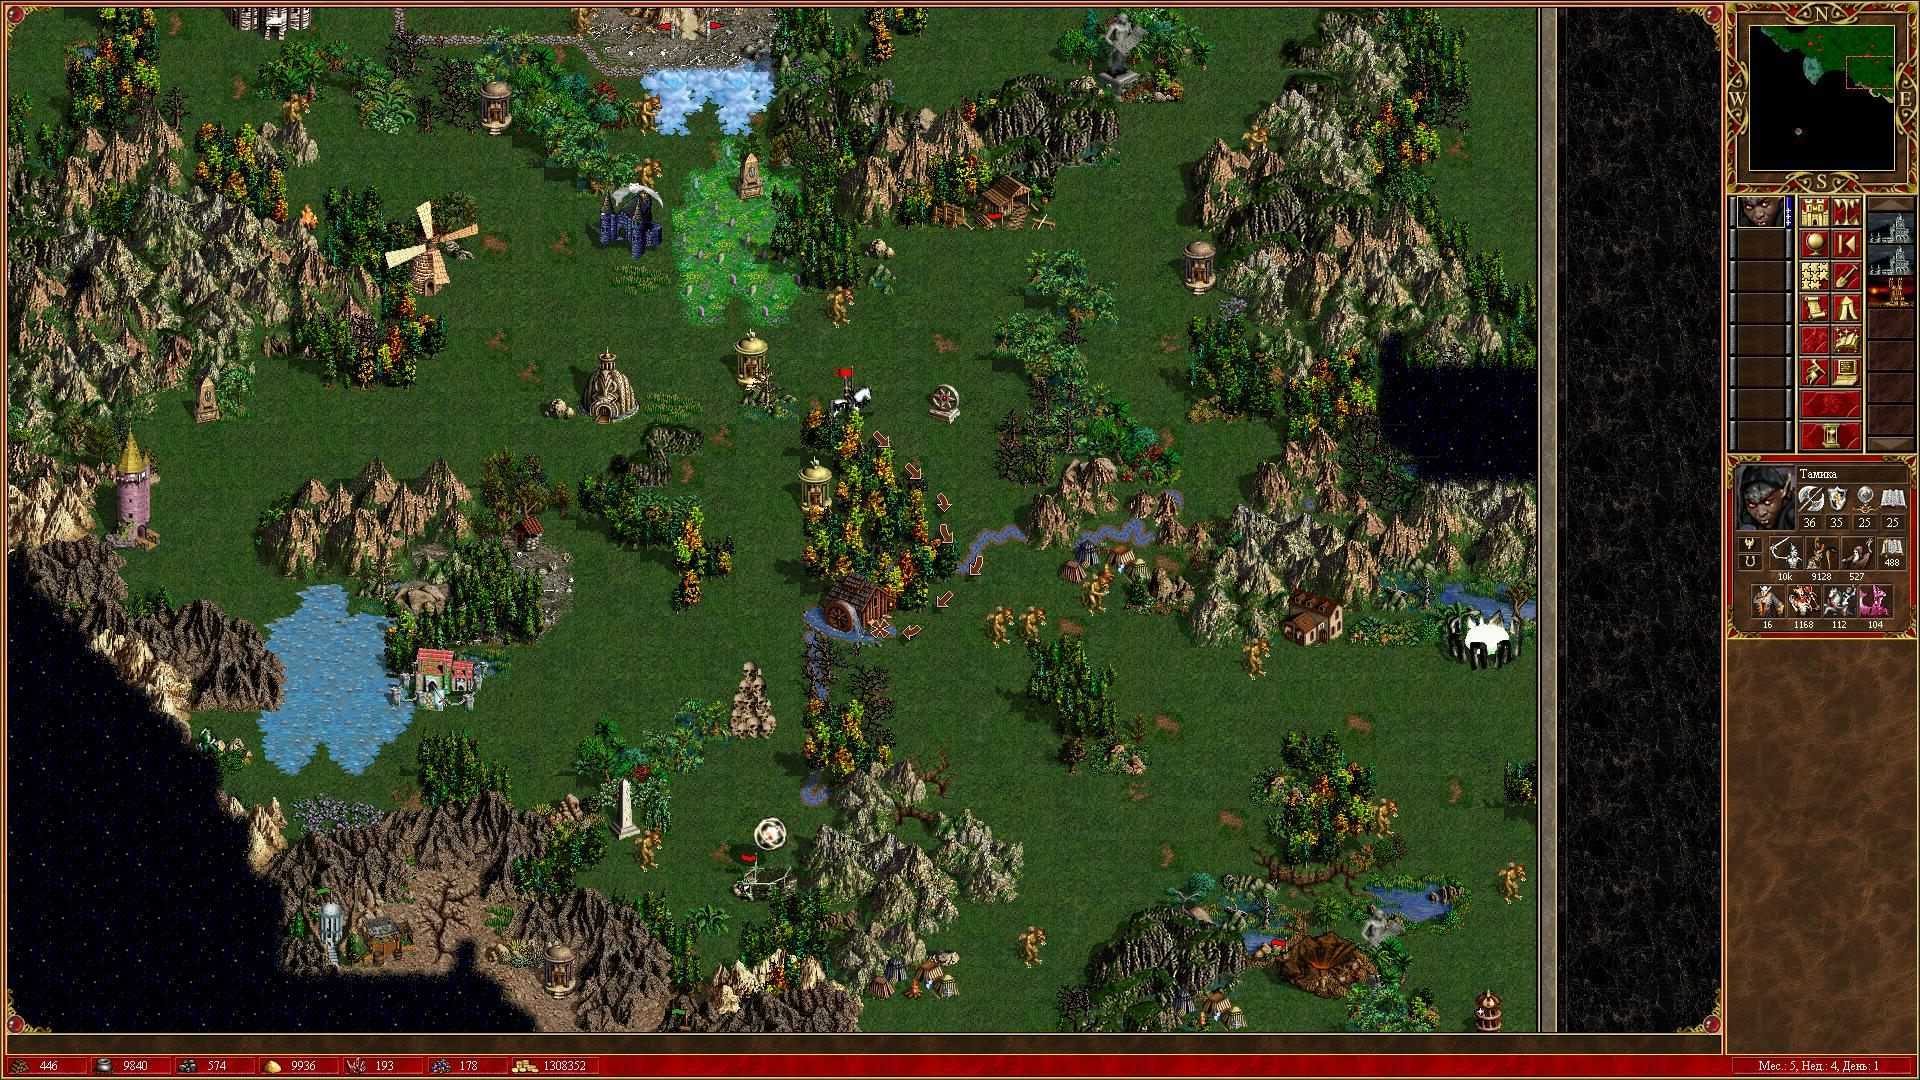 Heroes of might and magic 3 wog. Heroes of might and Magic 3 in the Wake of Gods. Heroes 3.5: во имя богов. Heroes of might and Magic III WOG 3.58. Heroes of might and Magic 3 WOG 3.61.